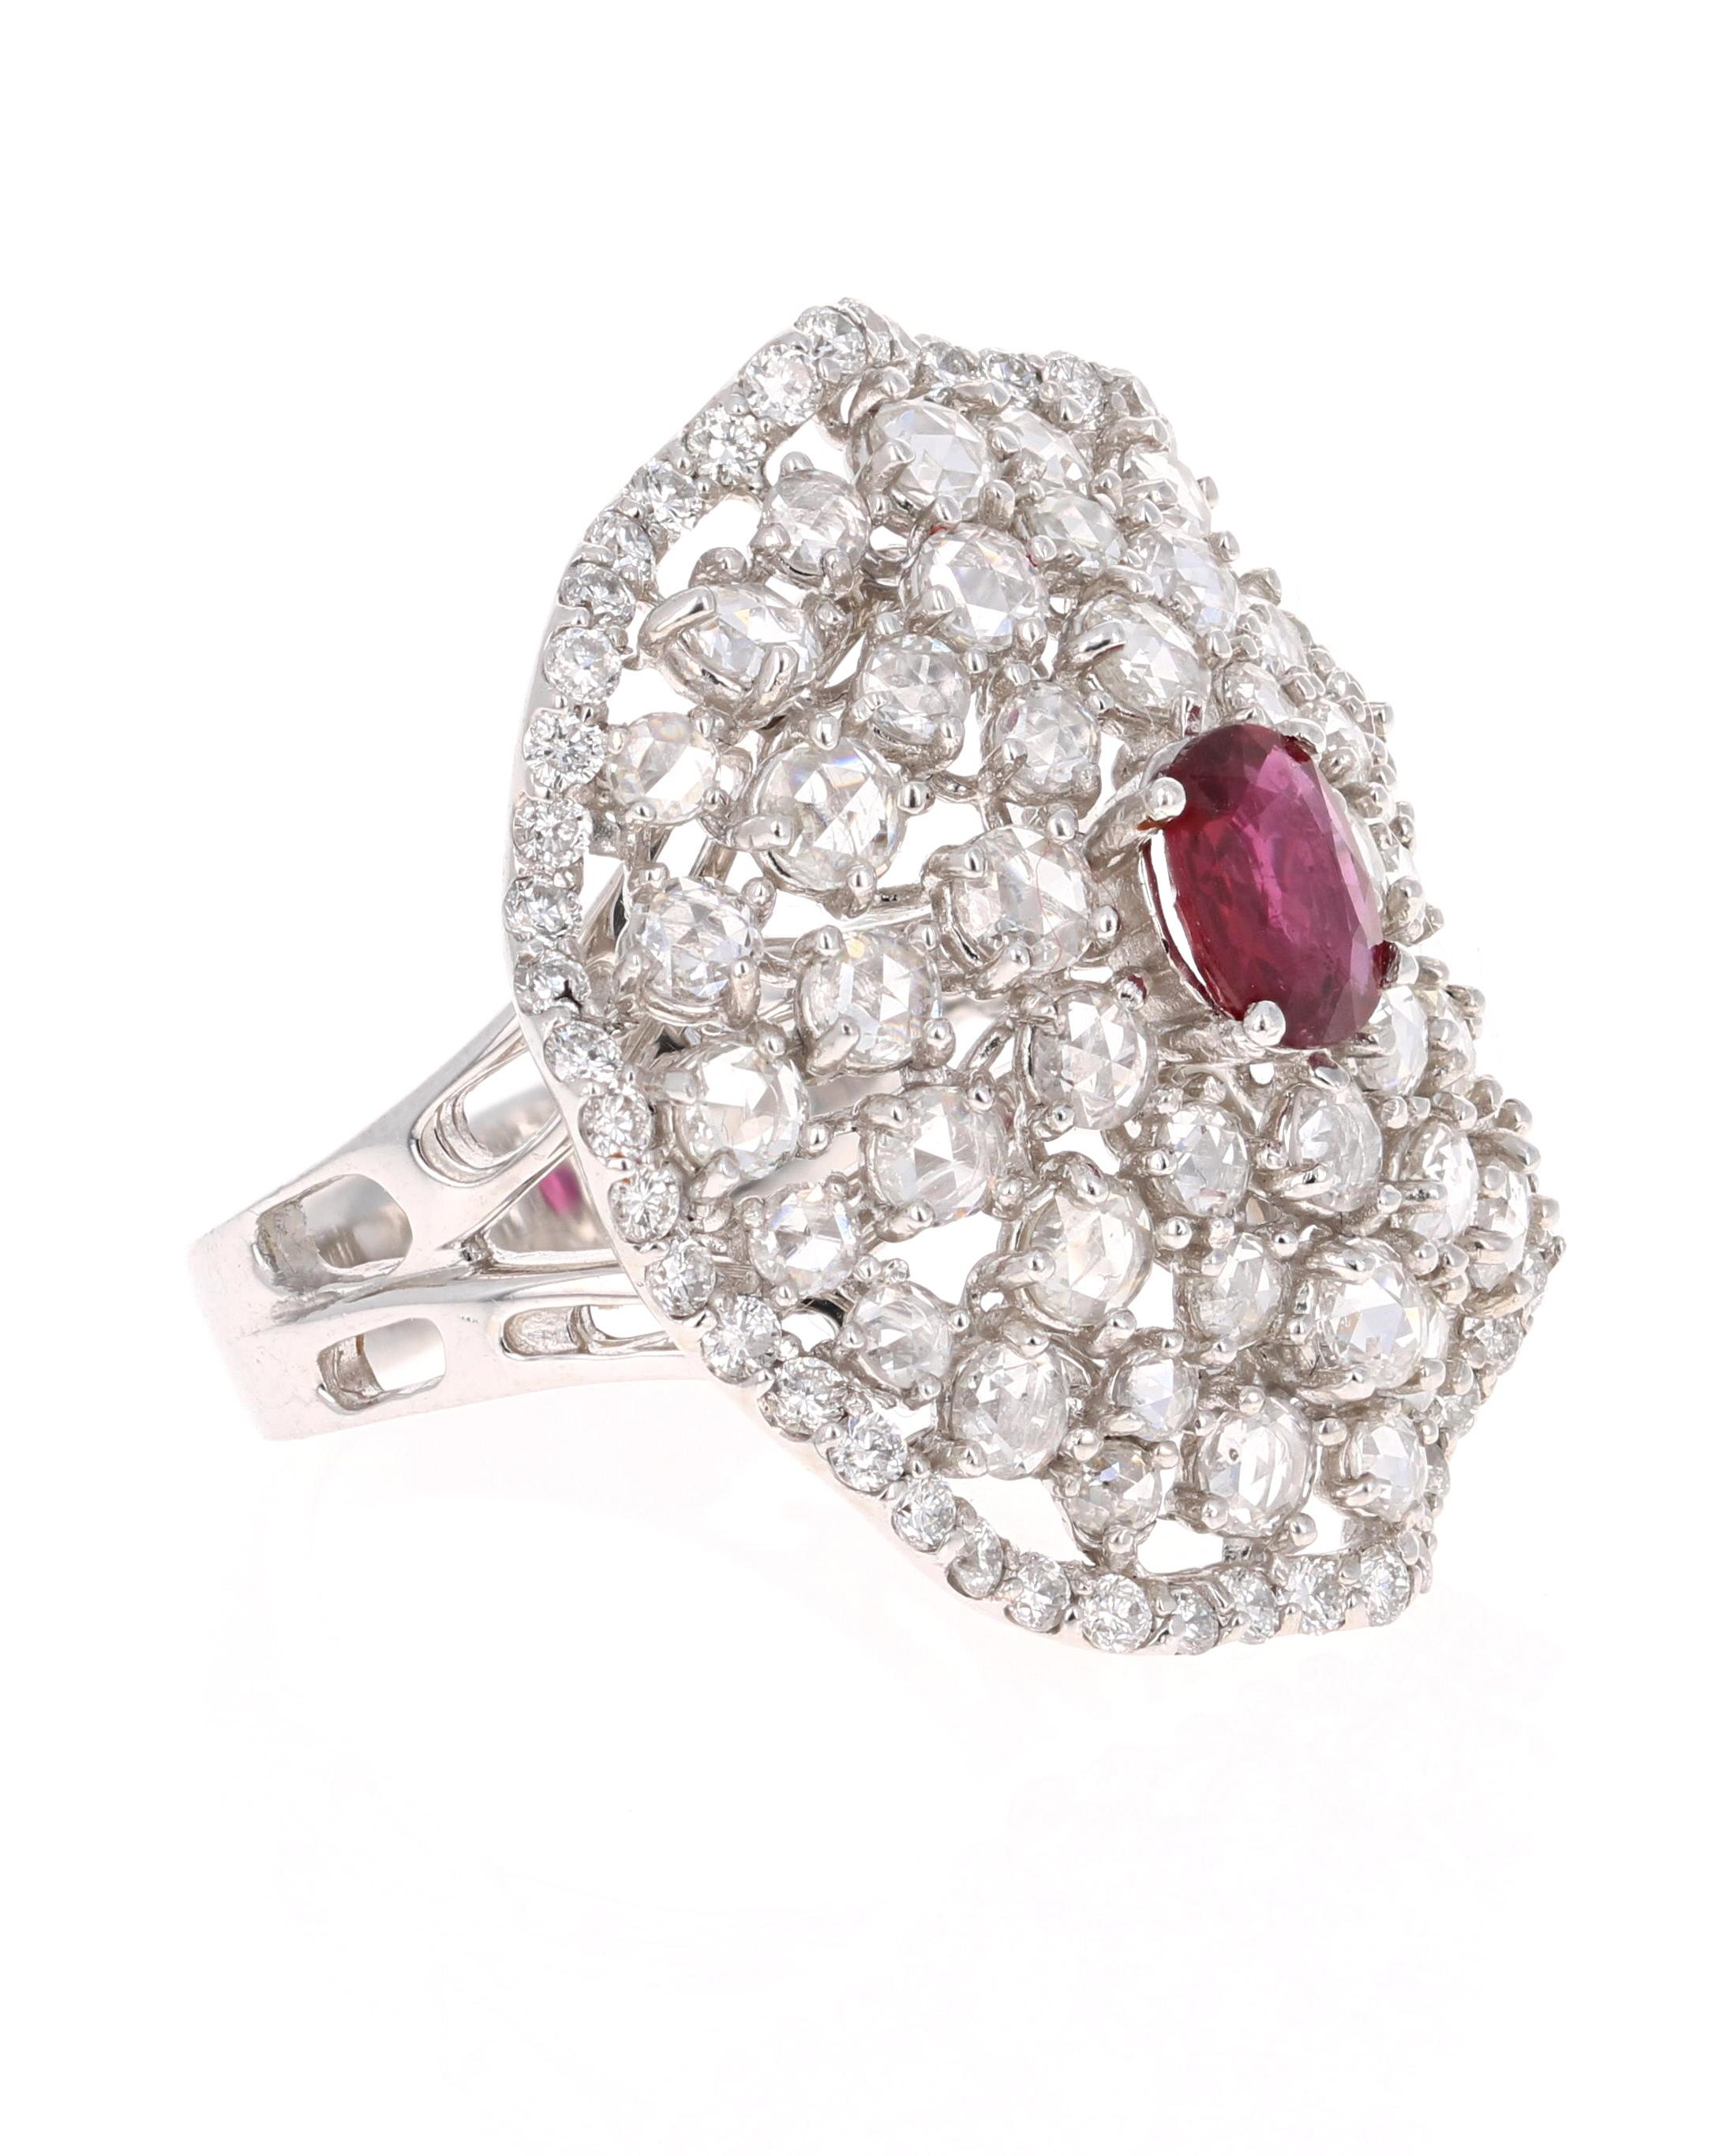 A real statement piece - Ruby and Rose Cut Diamond Cocktail Ring in 14K White Gold
This ring has a gorgeous Burmese Oval Cut Ruby that weighs 0.79 carats in the center and is surrounded by 45 Rose Cut Diamonds that weigh 2.07 Carats. It also has 50